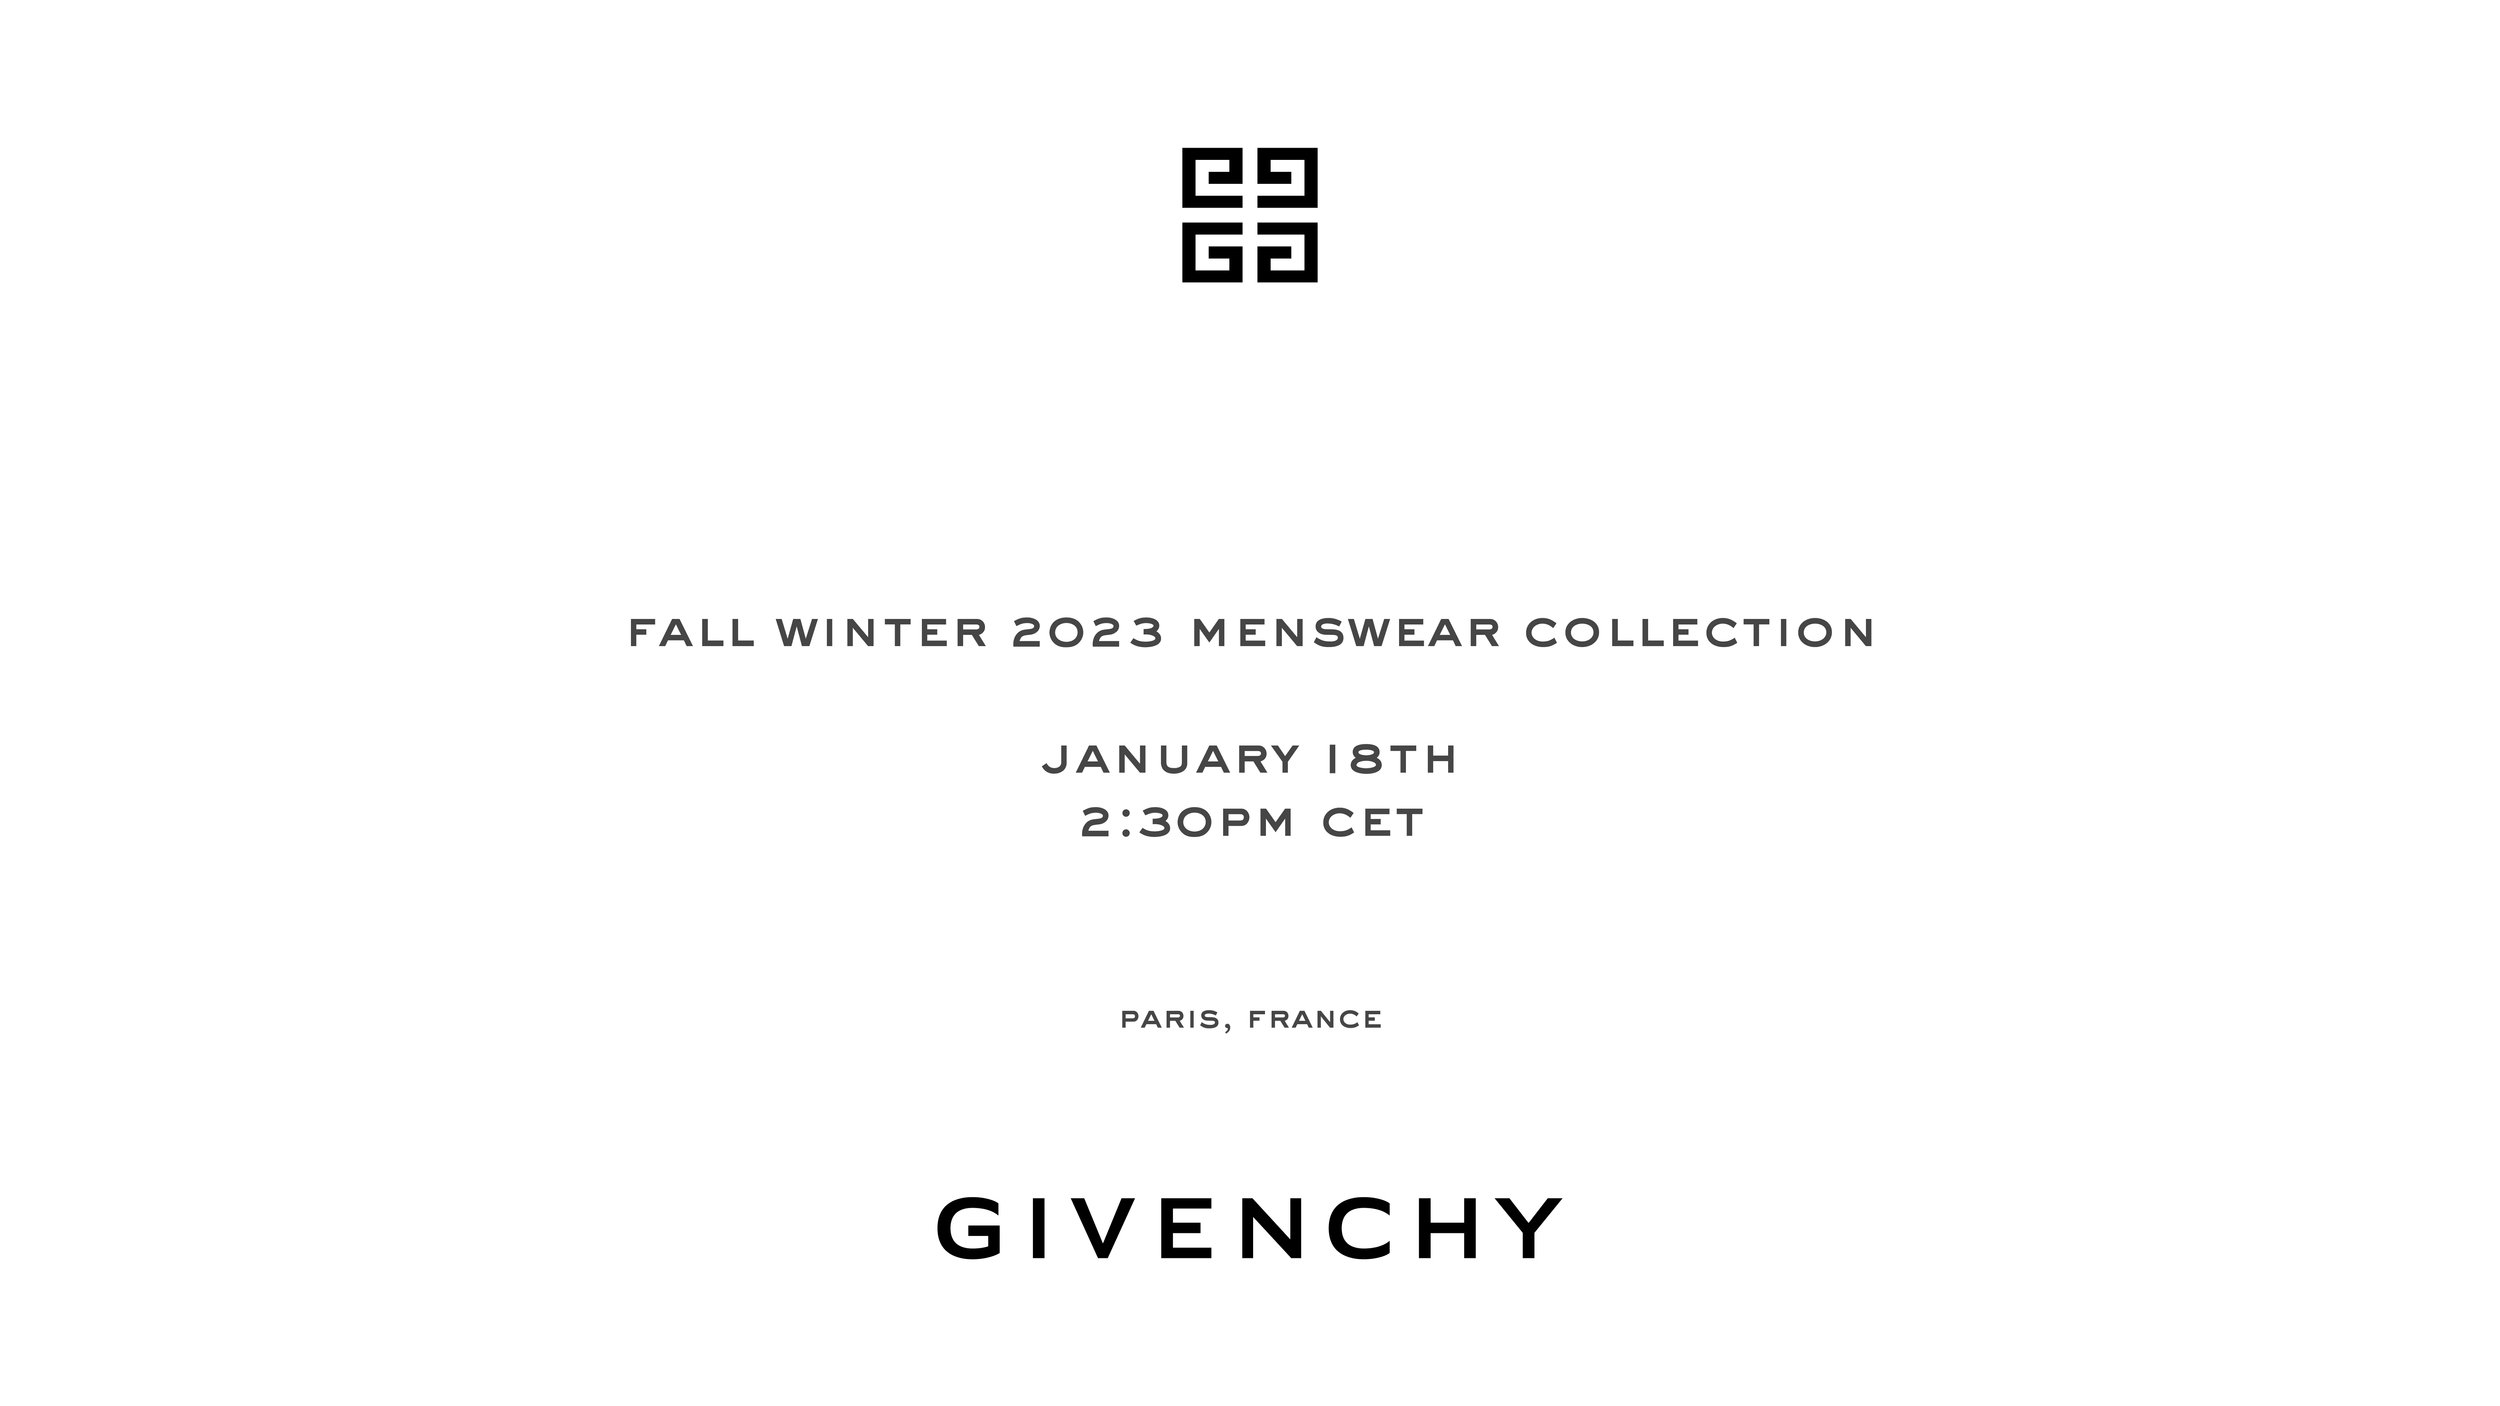 Taeyang is the Face of Givenchy Fall Winter 2023 Collection